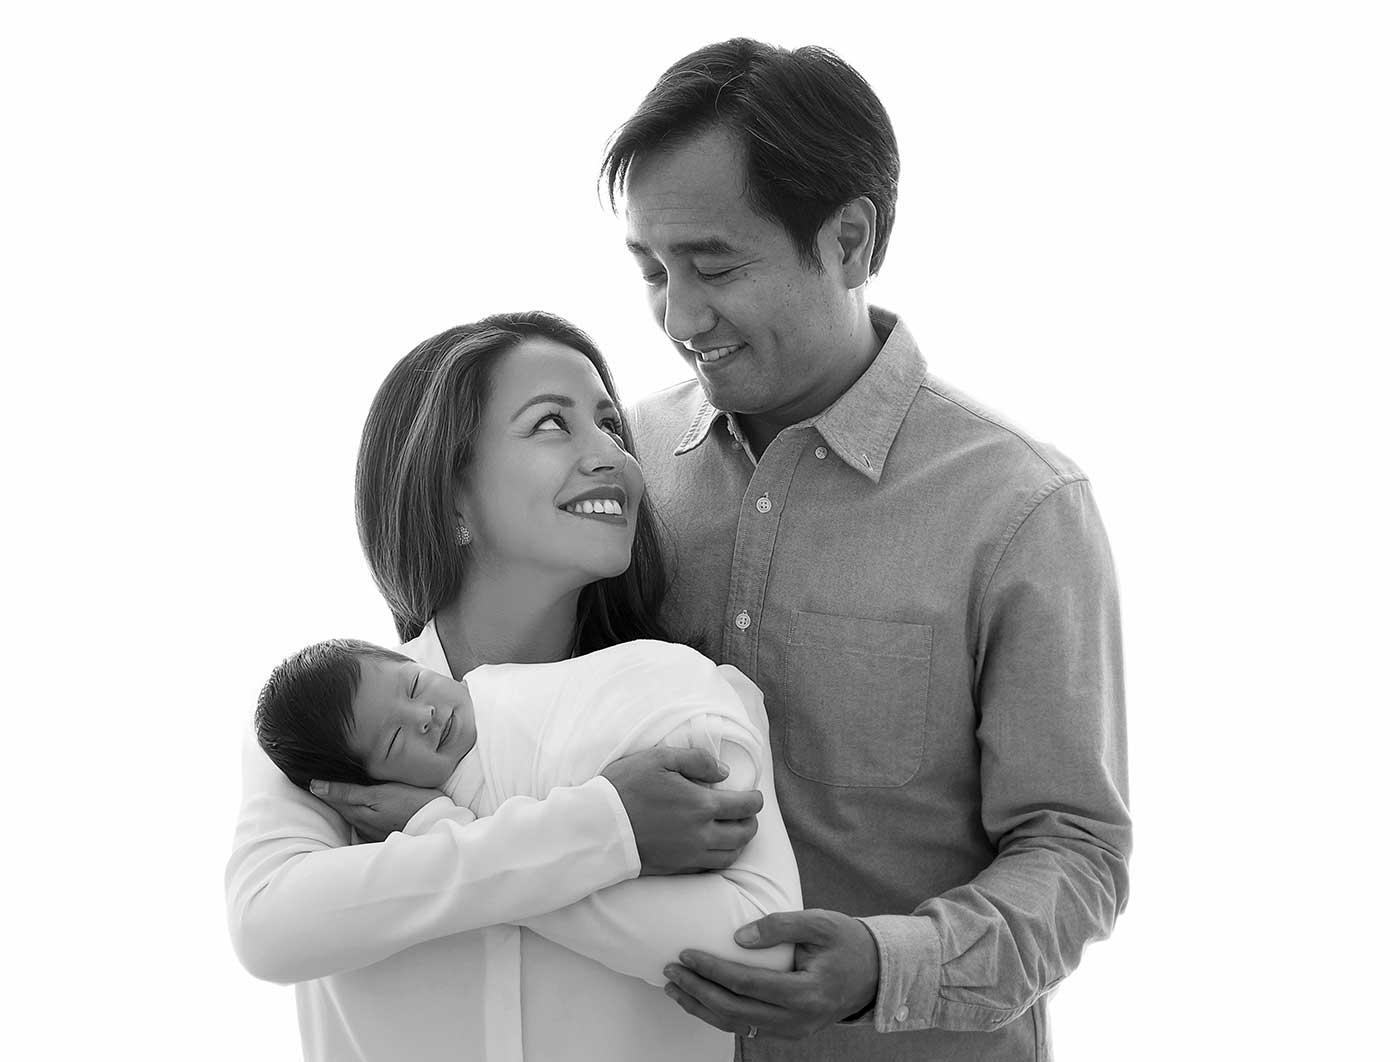 Timeless family portrait of a father, mother, and their newborn baby